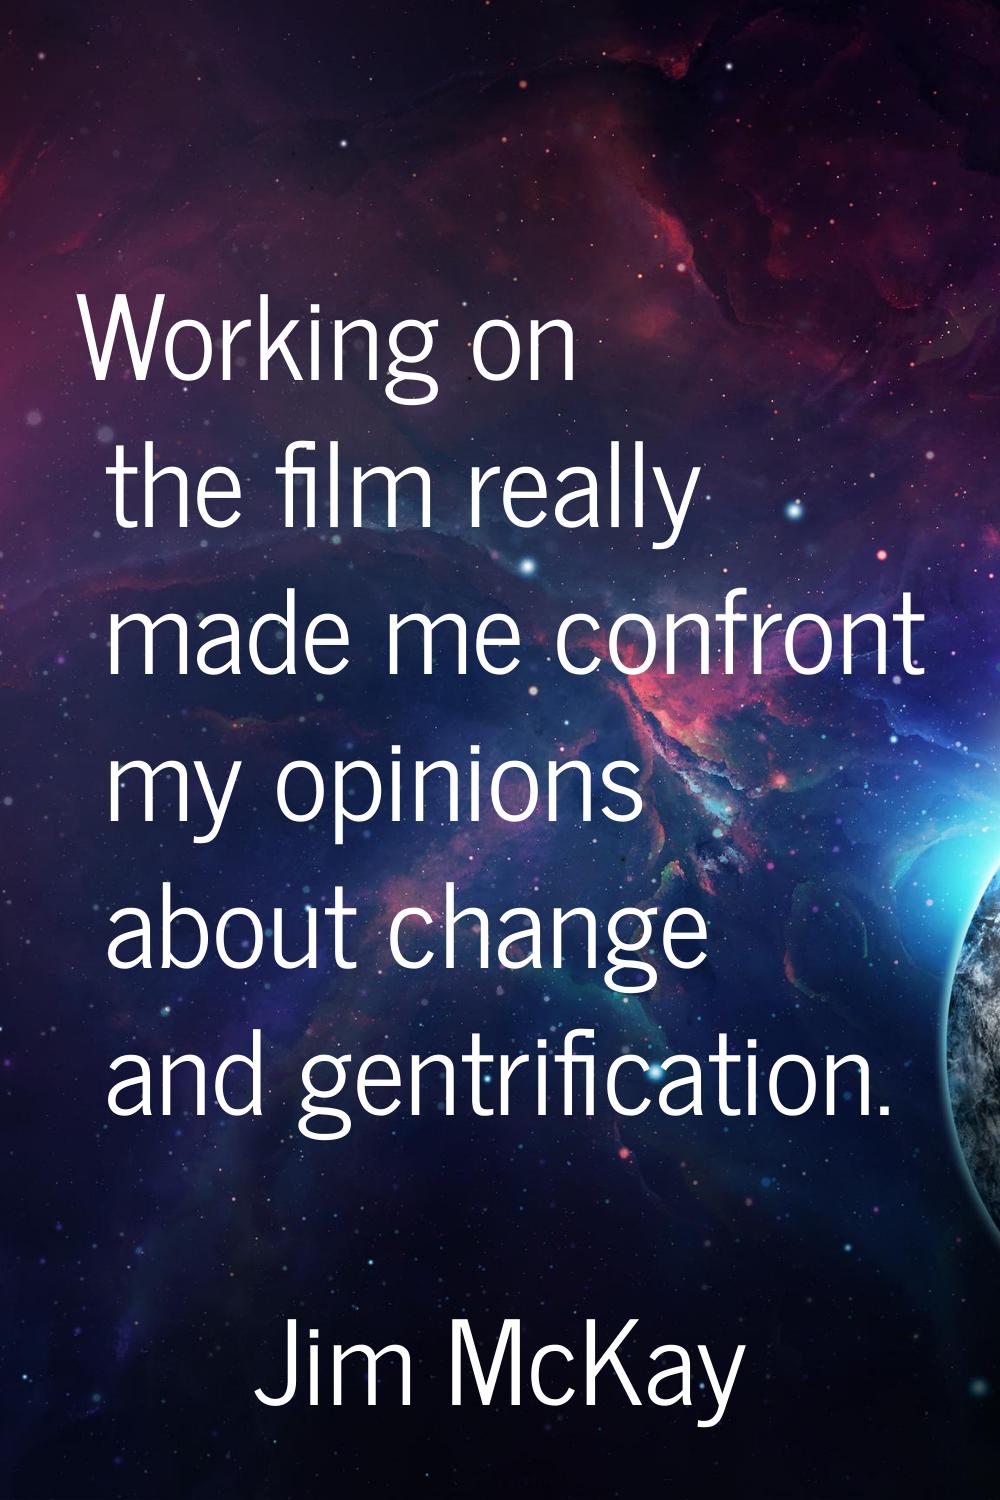 Working on the film really made me confront my opinions about change and gentrification.